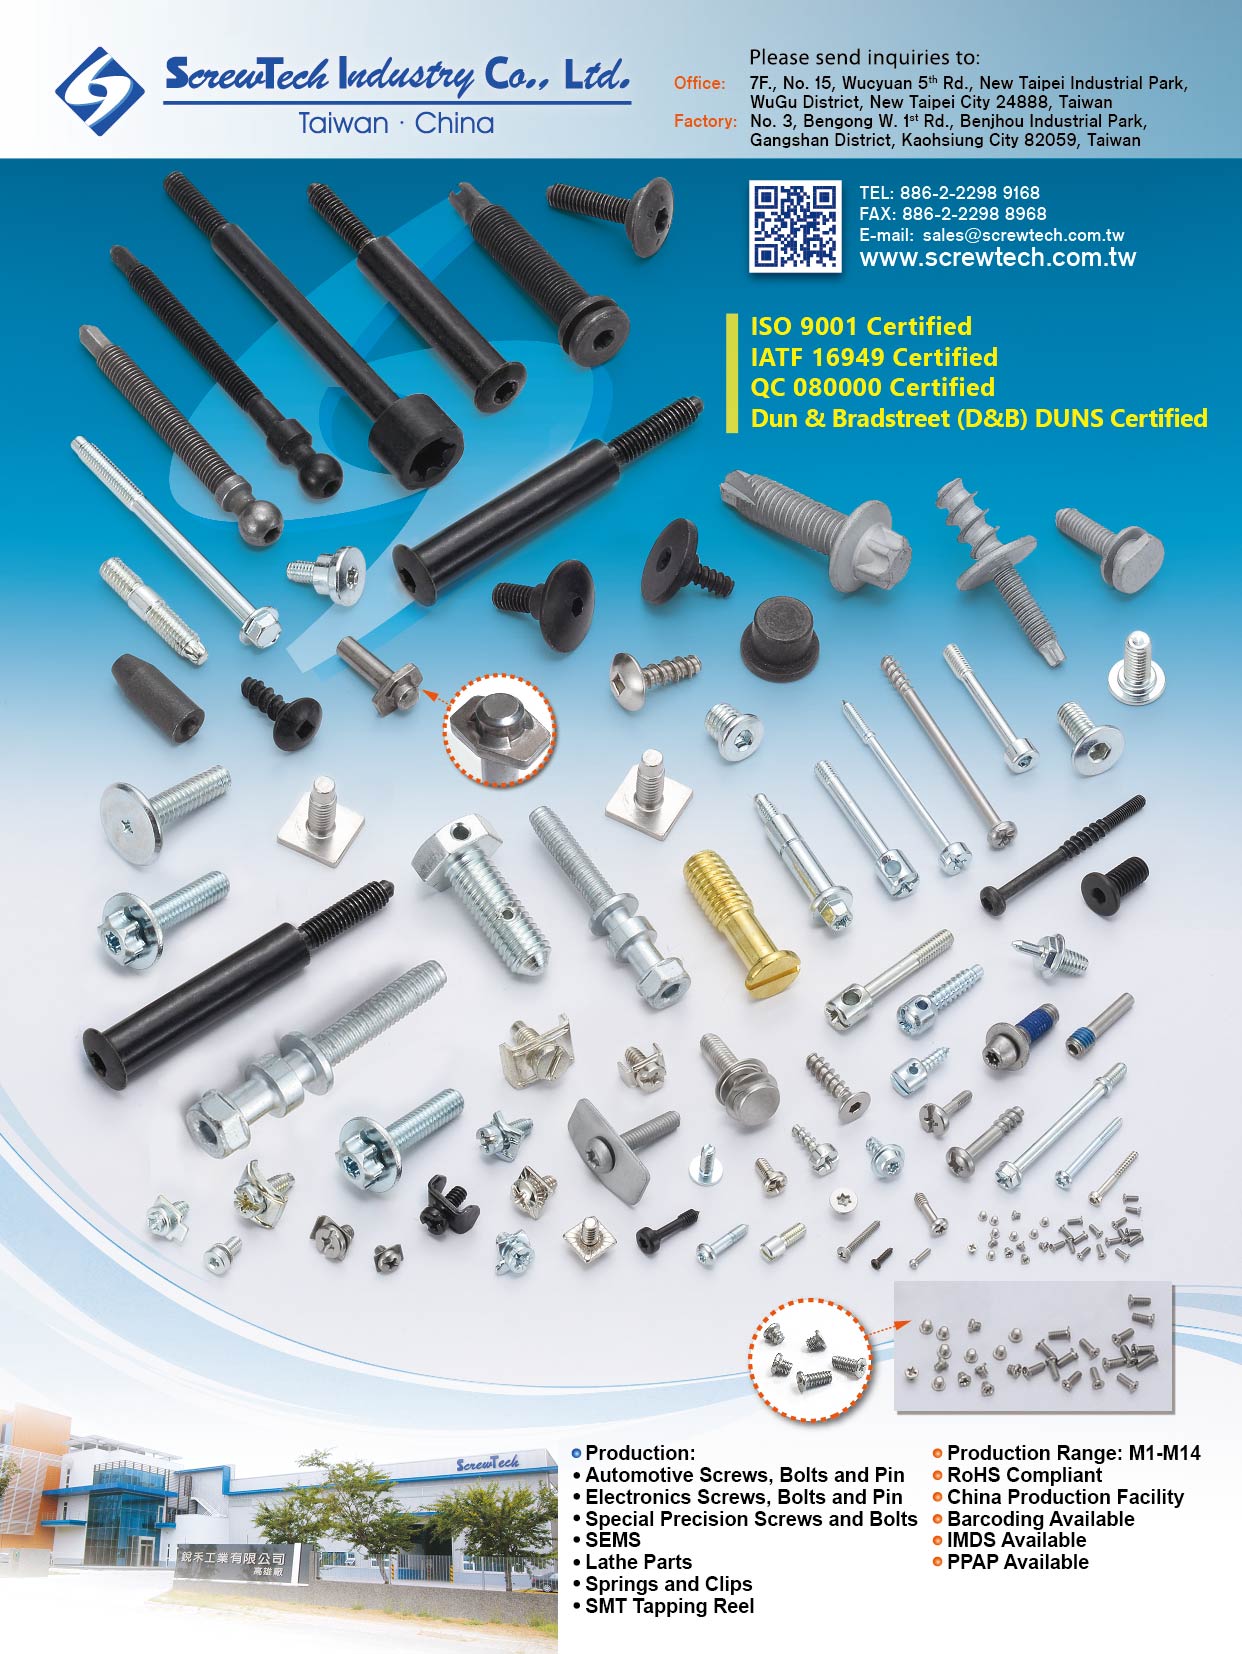 SCREWTECH INDUSTRY CO., LTD.  , Automotive Screws, Automotive Bolts, Automotive Pin, Electronic Screws, Electronic Bolts, Electronic Pin, Special Precision Screws, Special Precision Bolts, SEMS, Lathe Parts, Springs and Clips, SMT Tapping Reel , Automotive Screws